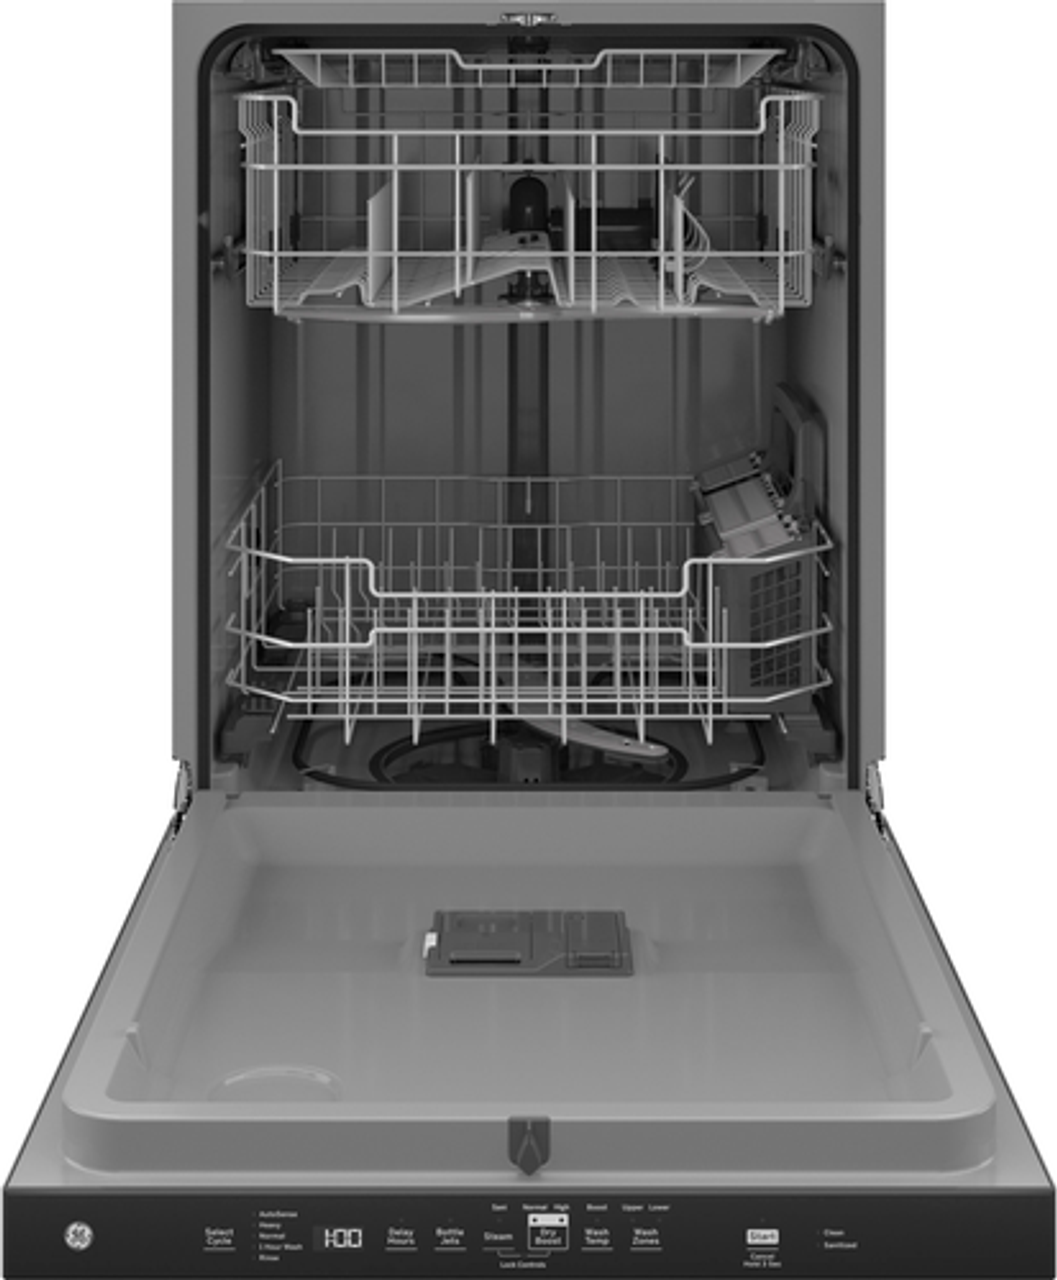 GE - Top Control Built-In Dishwasher with 3rd Rack, 50 dBA - Fingerprint Resistant Stainless Steel